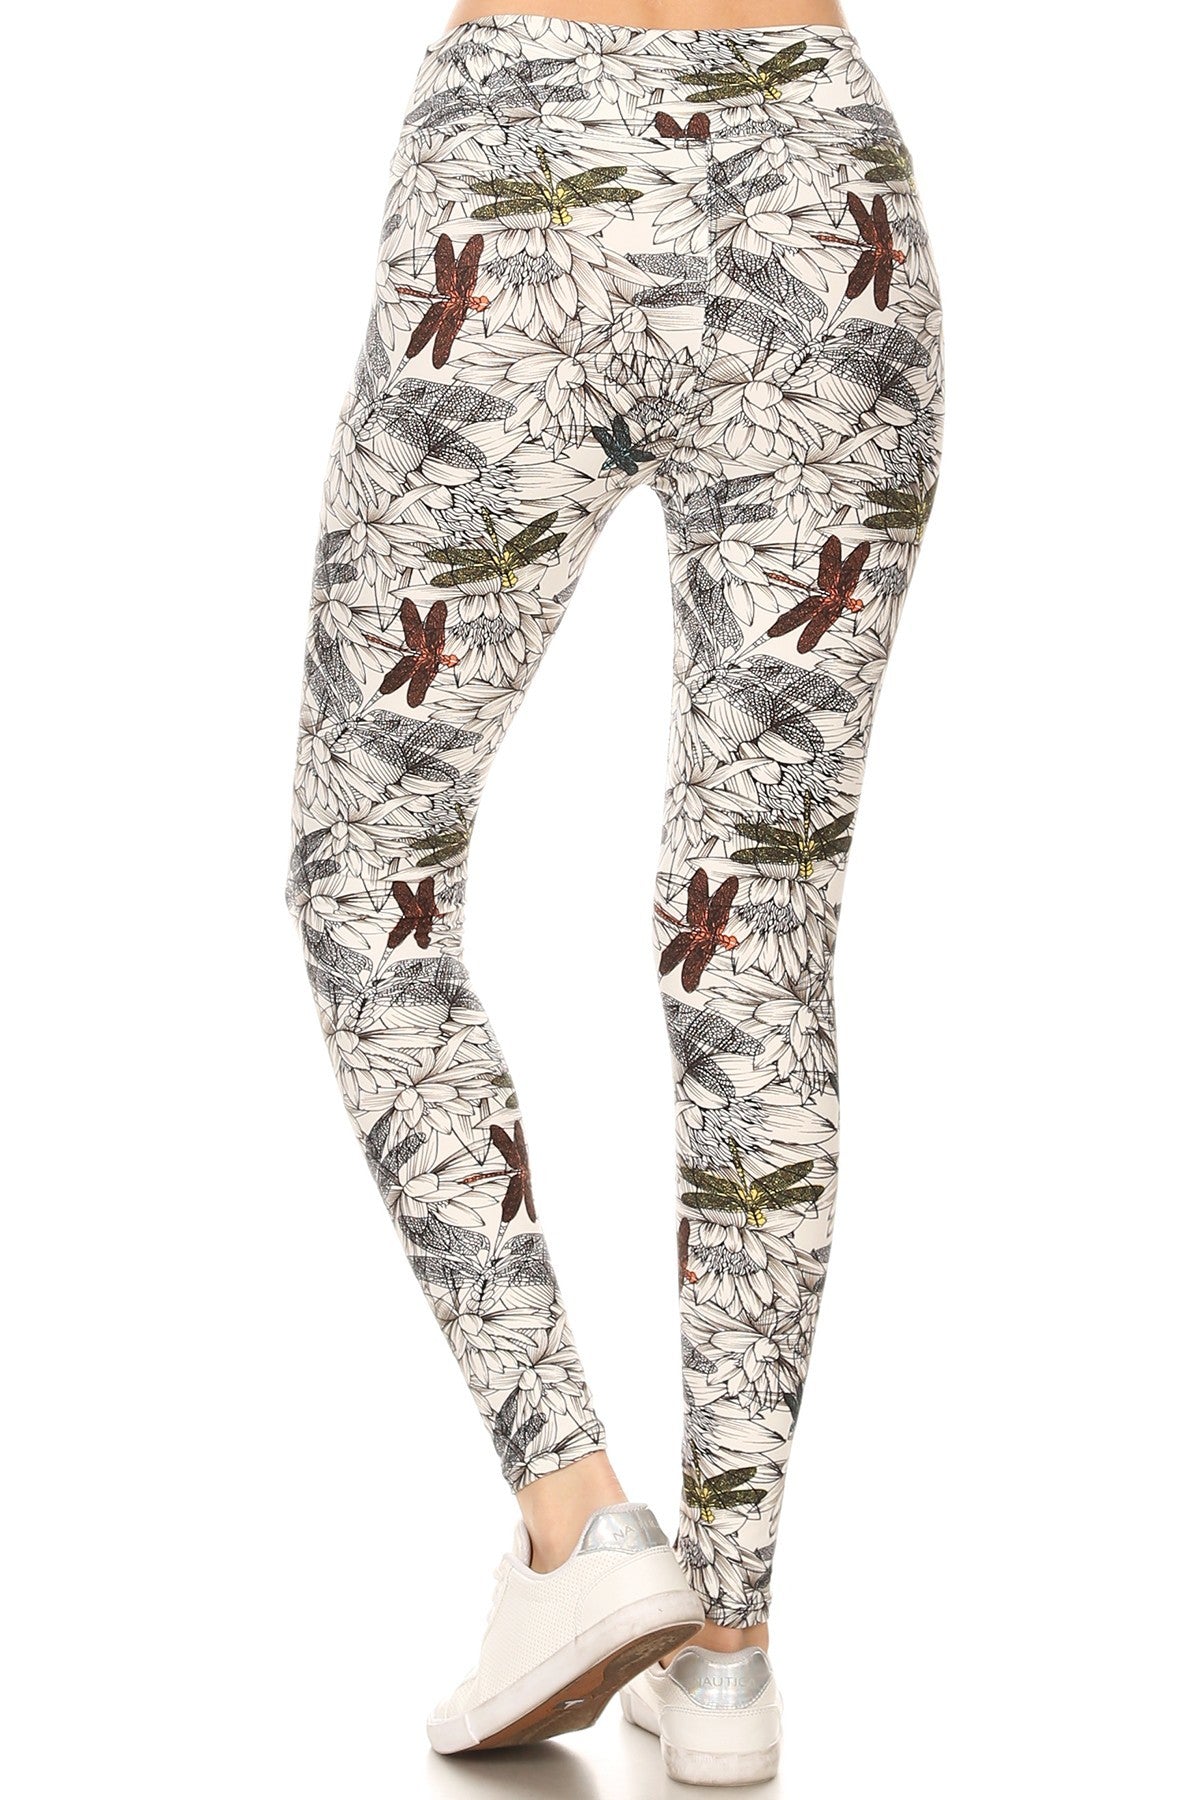 Yoga Style Banded Lined Dragonfly Print, Full Length Leggings In A Slim Fitting Style With A Banded High Waist - Tigbul's Fashion